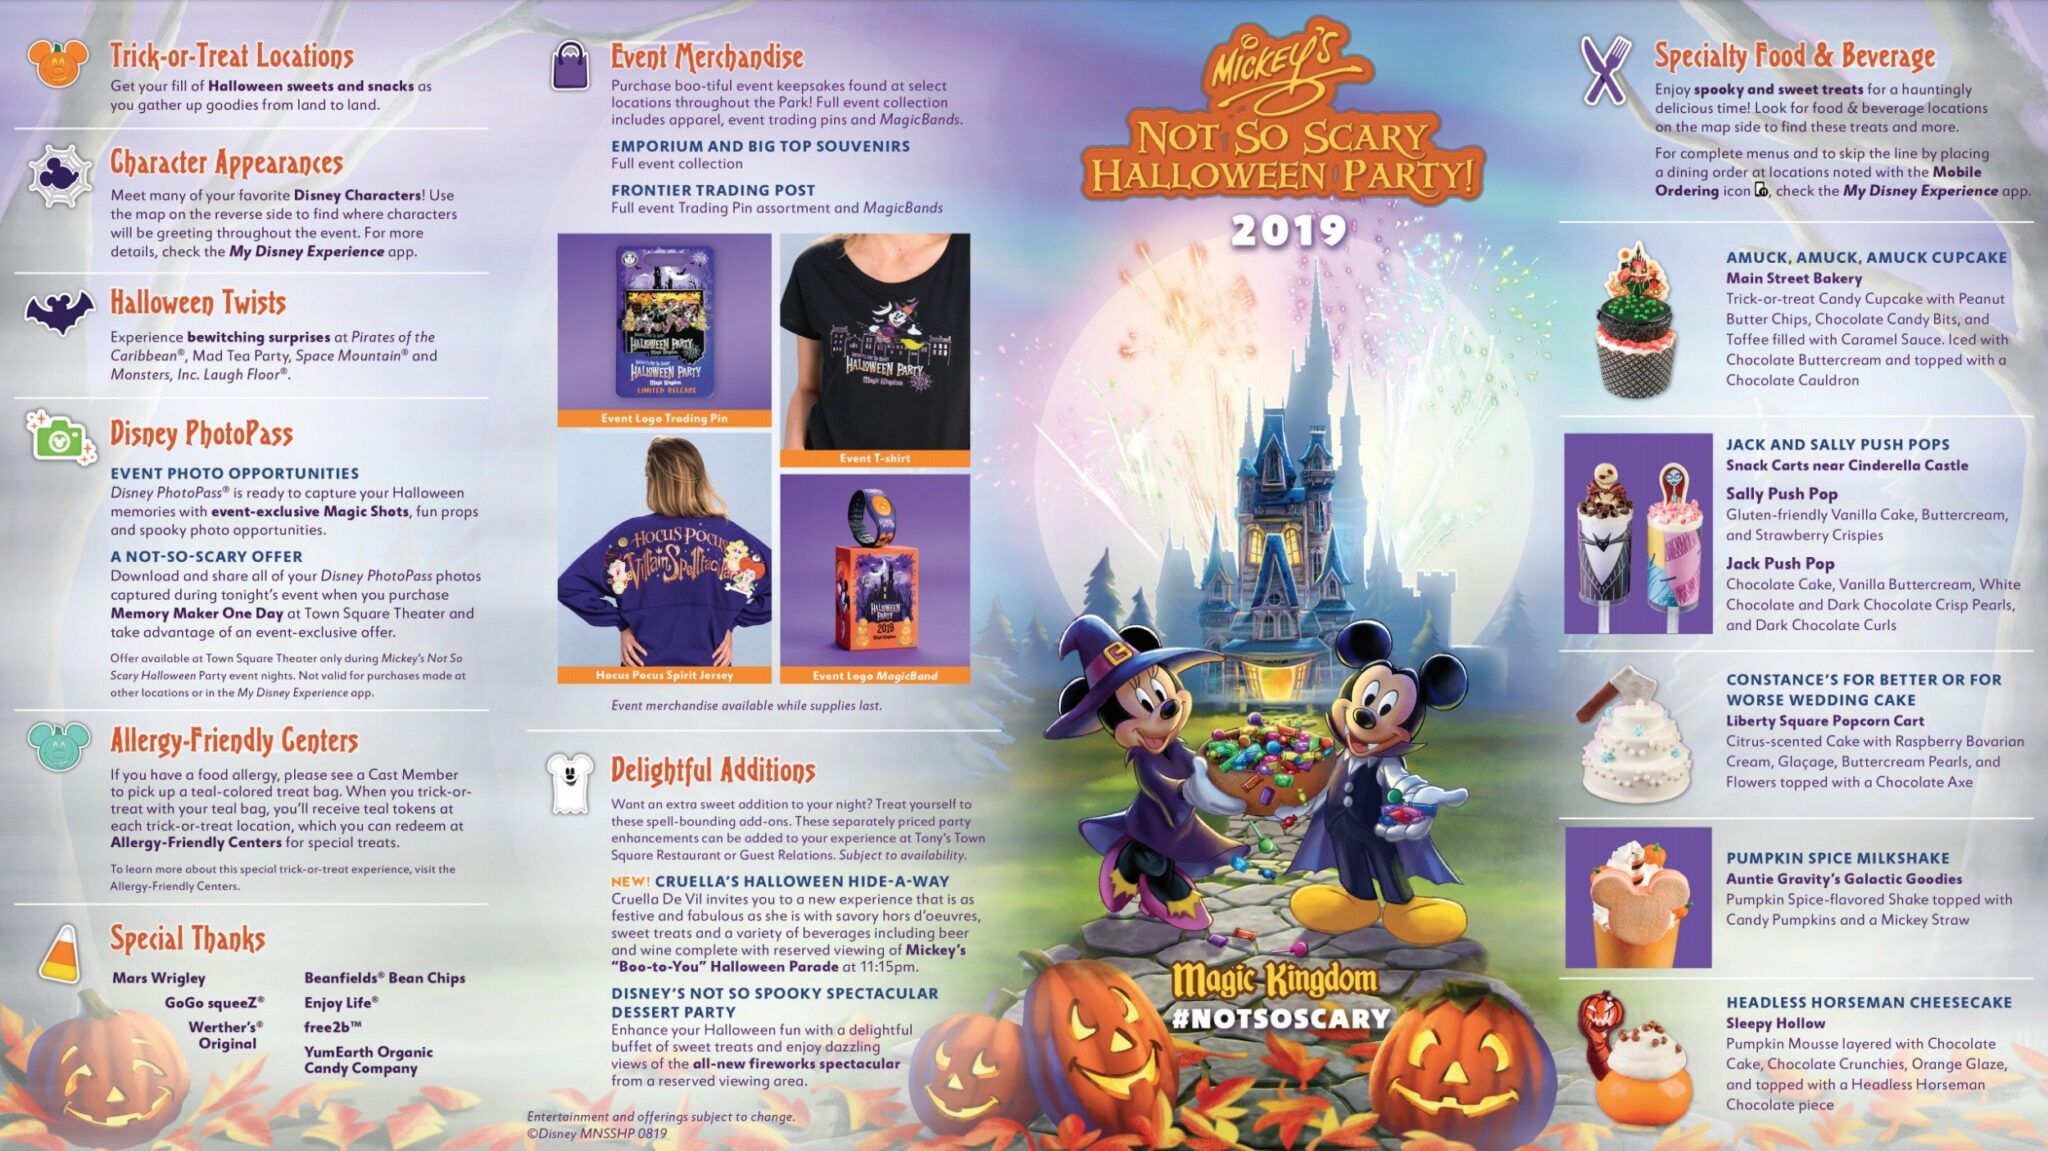 Mickey's Not So Scary Halloween Party Complete Guide With Best Dates